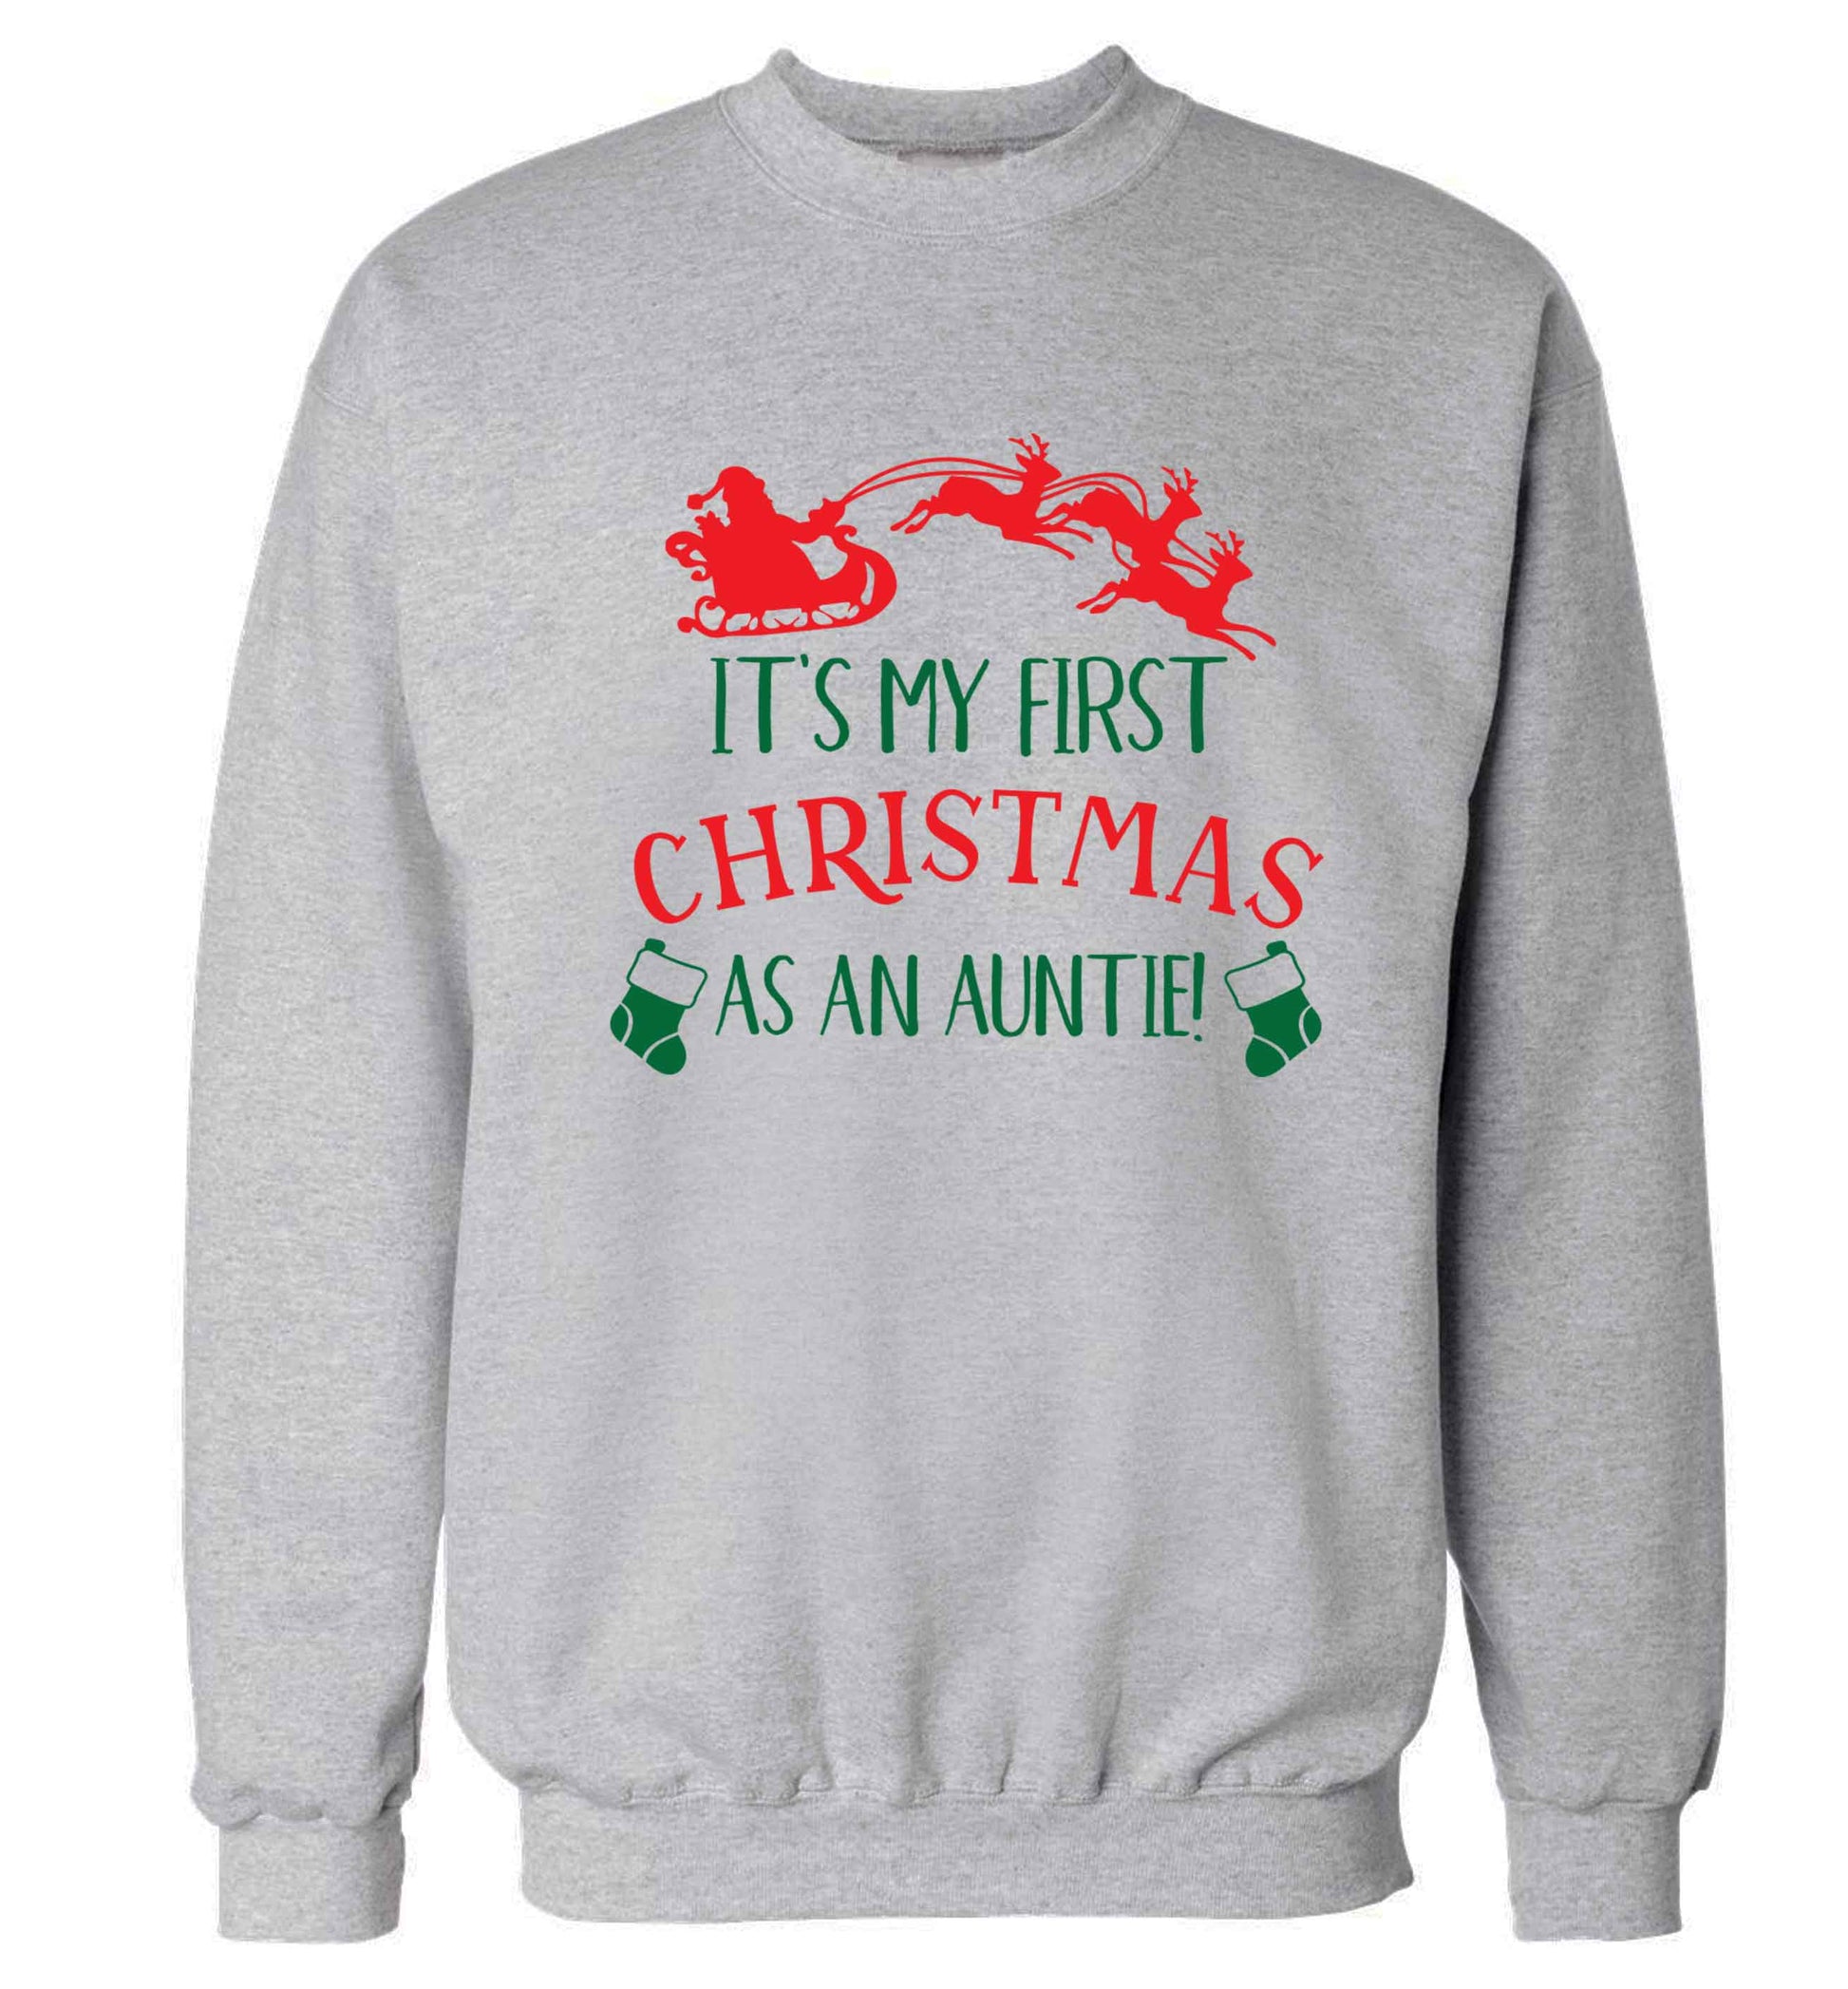 It's my first Christmas as an auntie! Adult's unisex grey Sweater 2XL